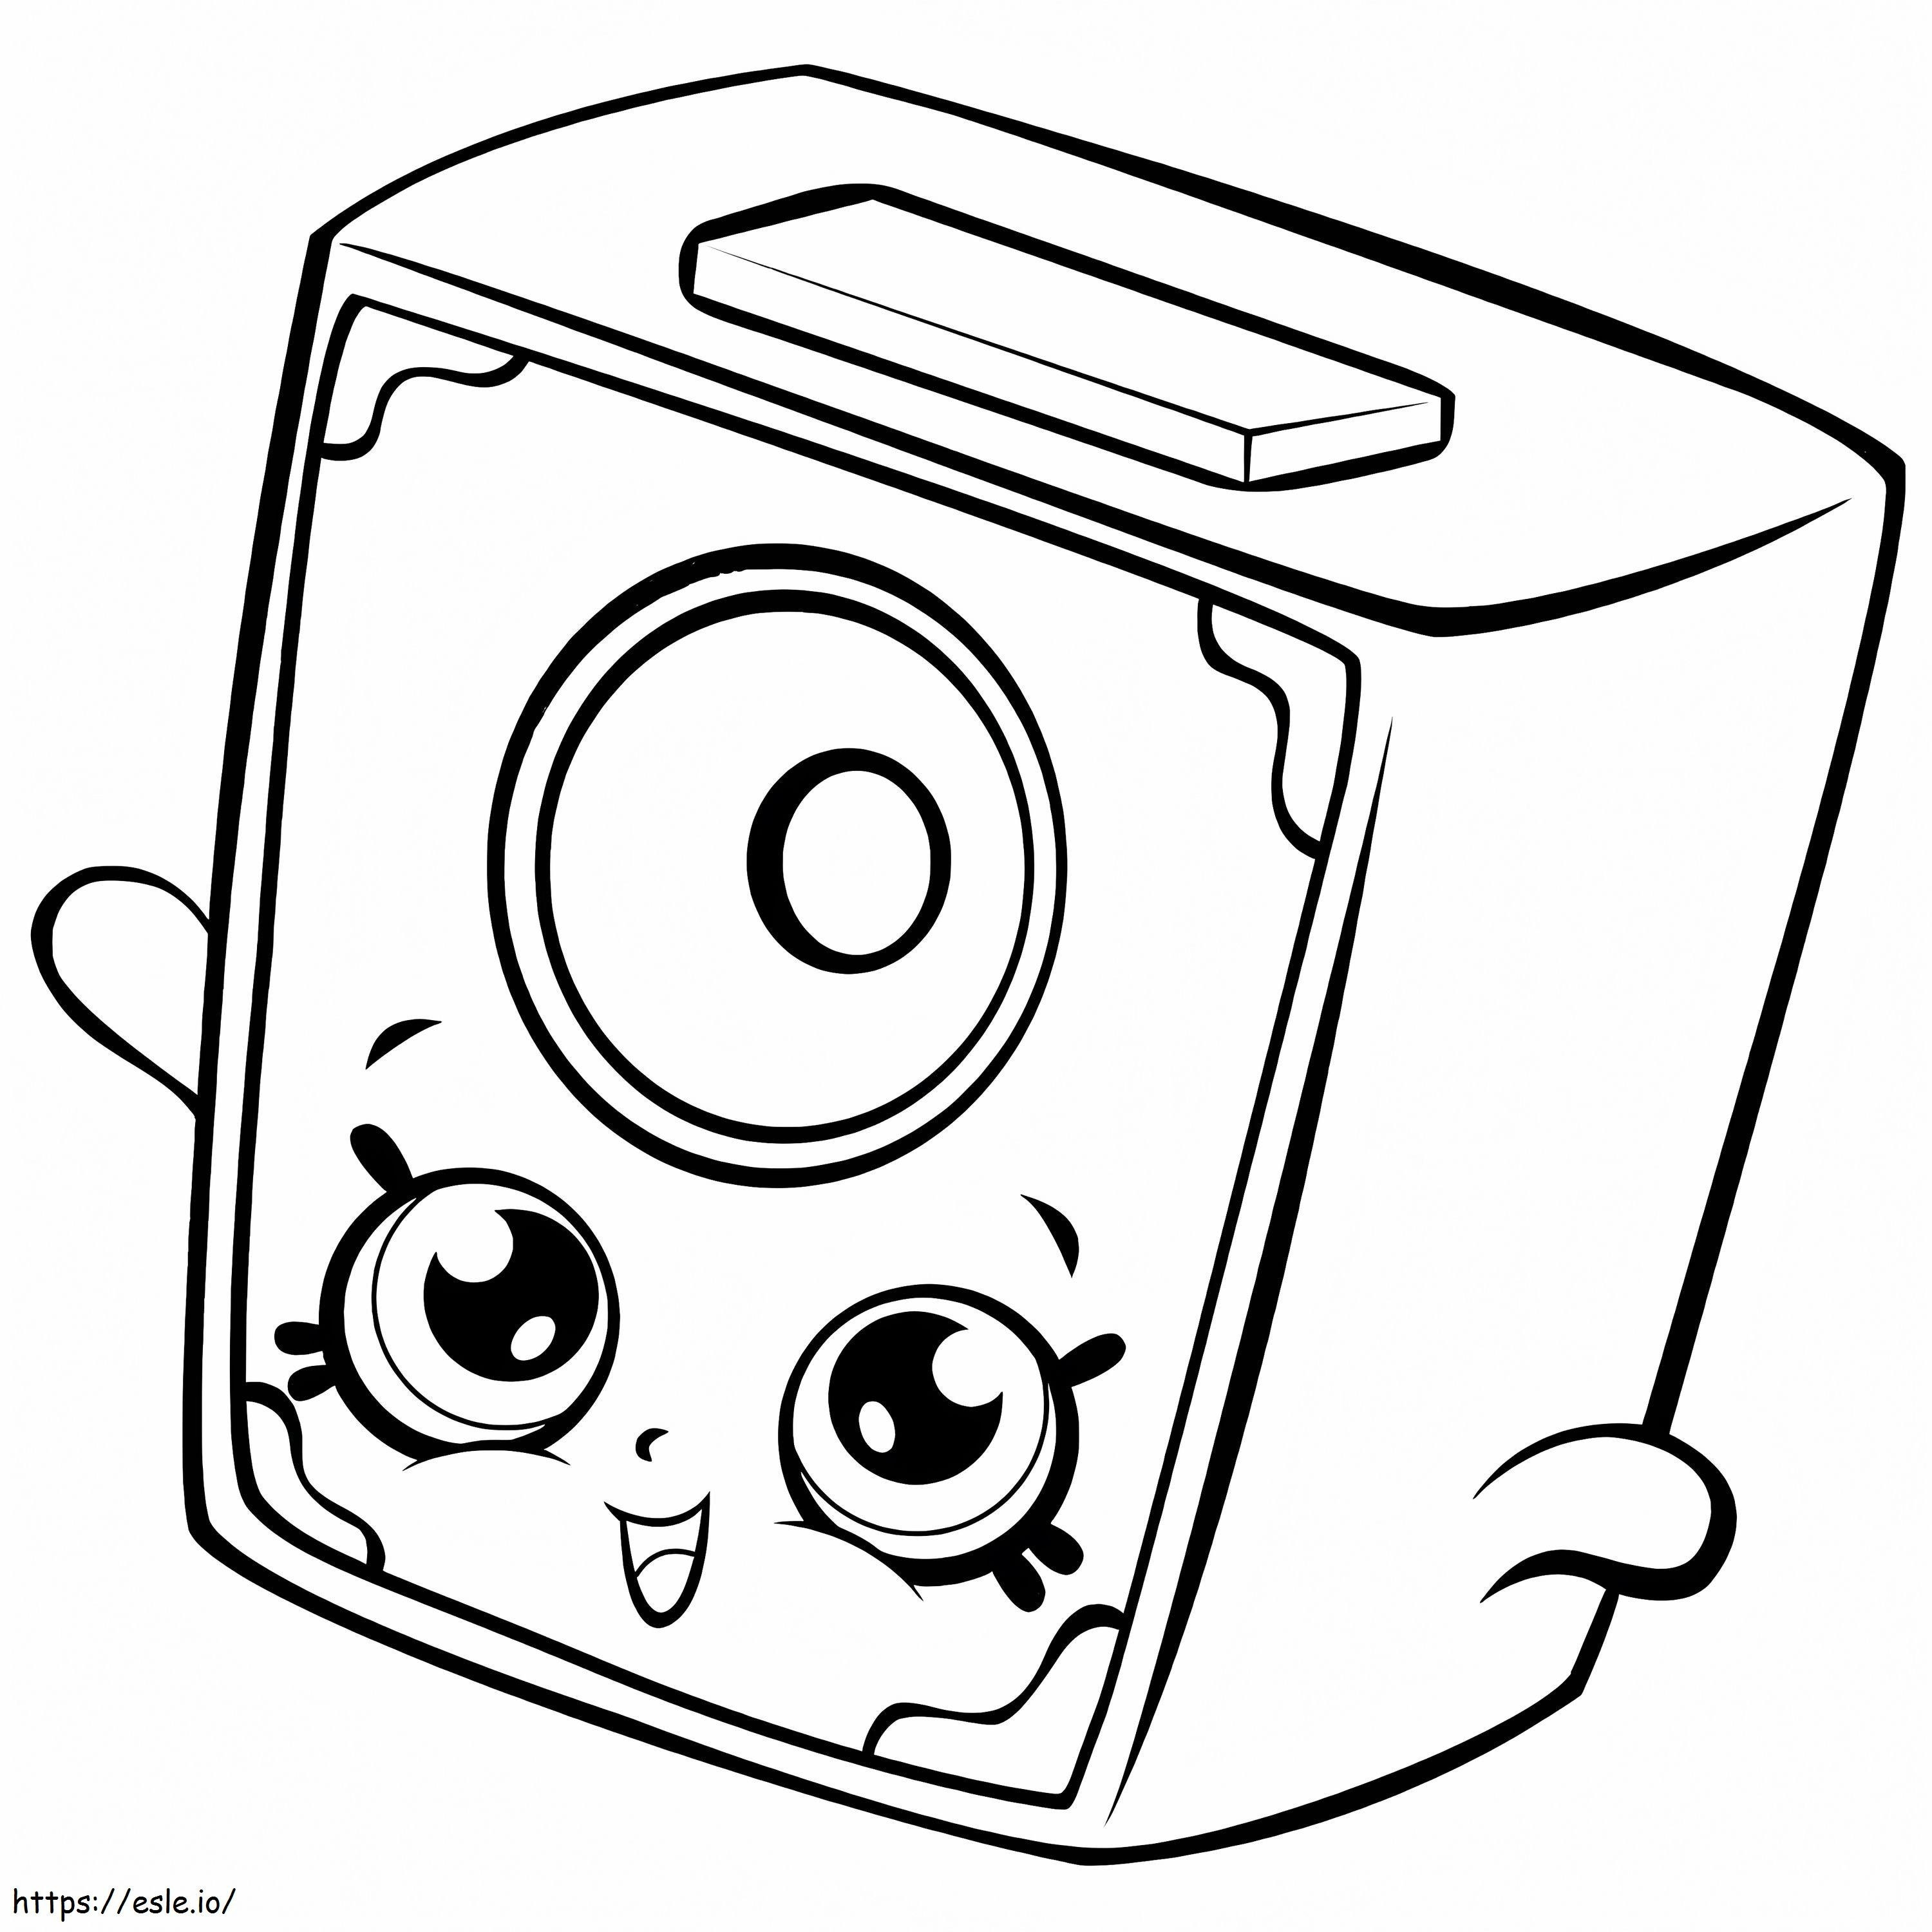 Little Squeeky Speaker Shopkin coloring page